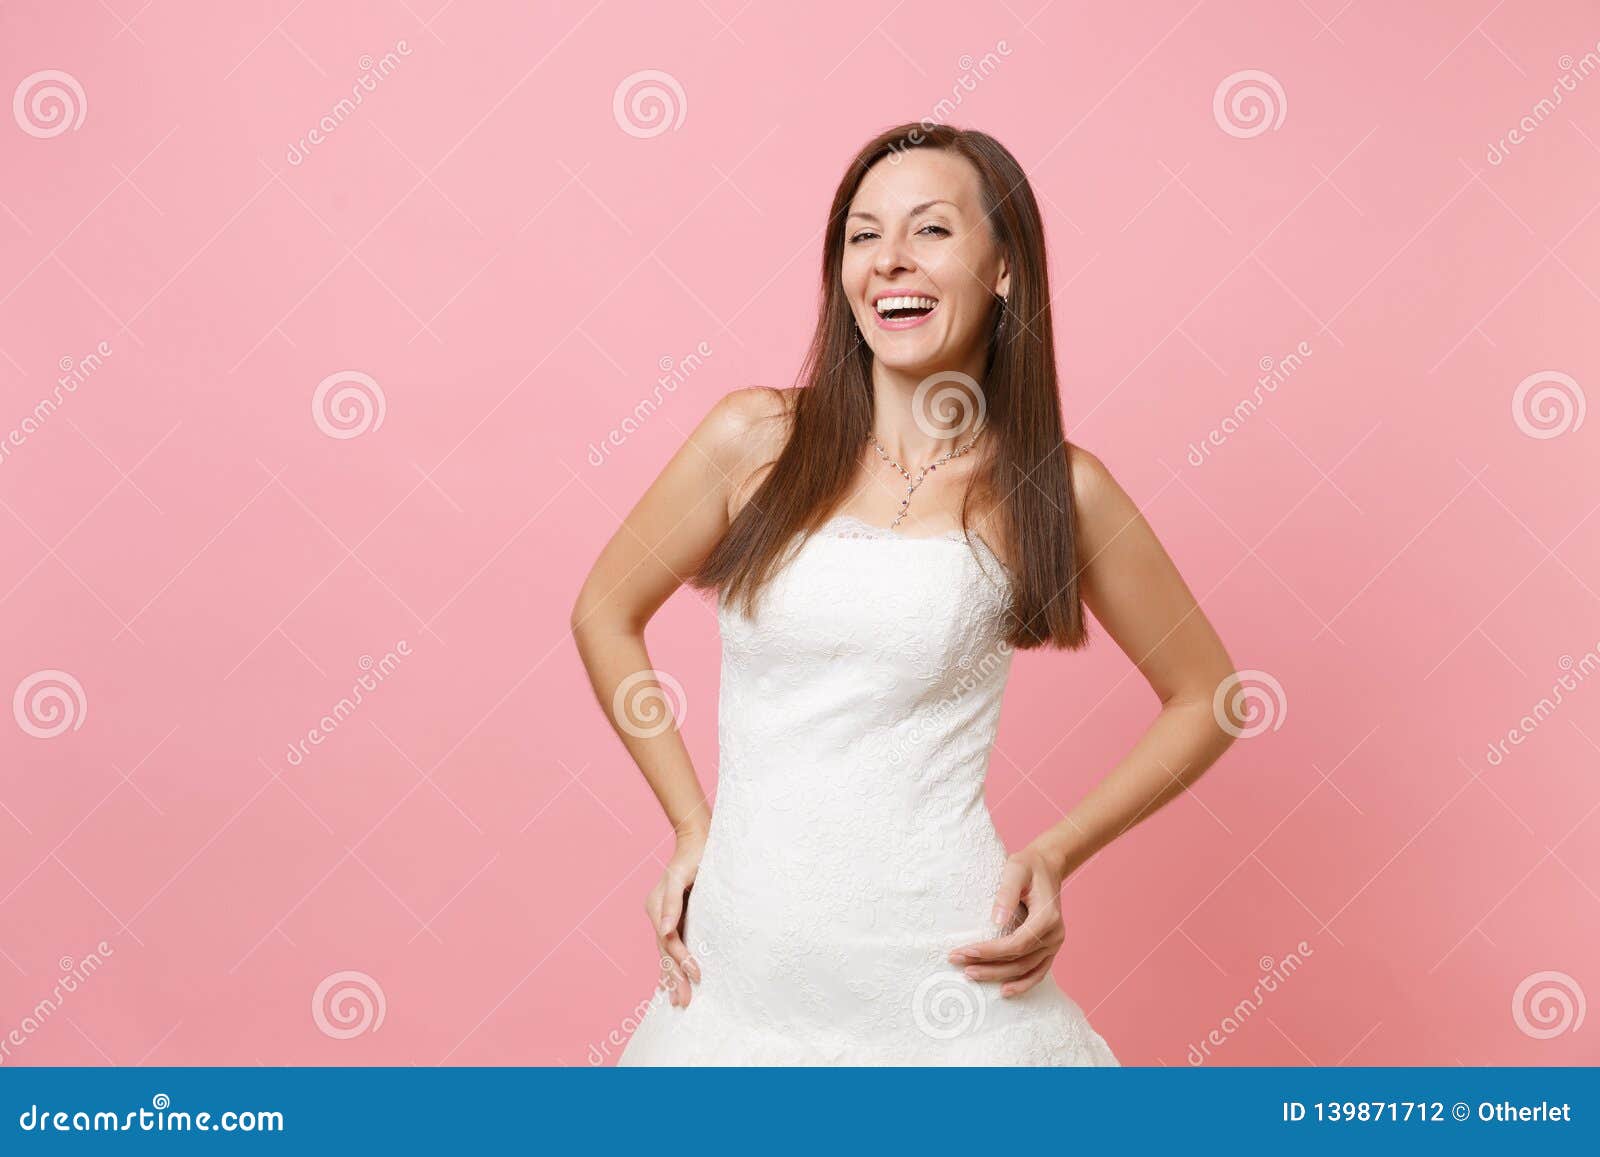 Portrait of Laughing Happy Bride Woman in Elegant White Wedding Lace ...